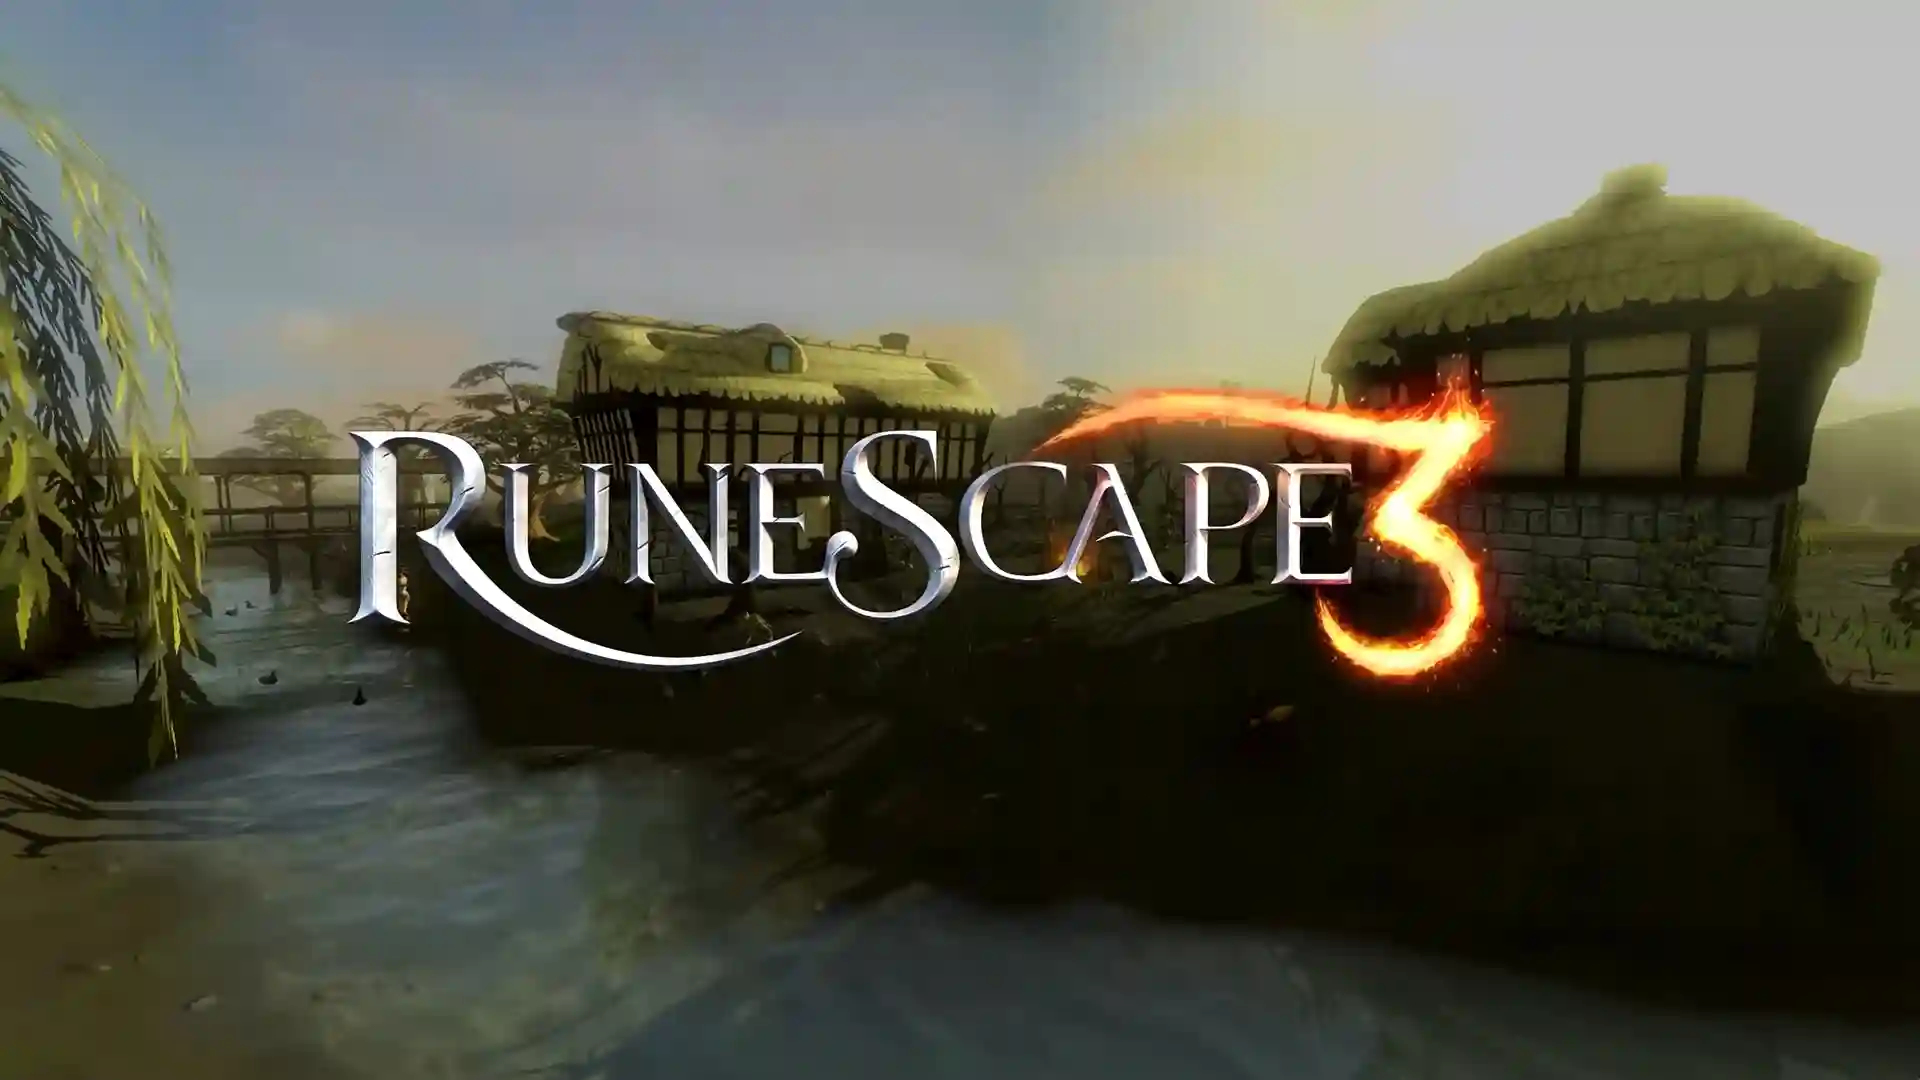 OSRS & RuneScape Comes to Steam: What Does This Mean?